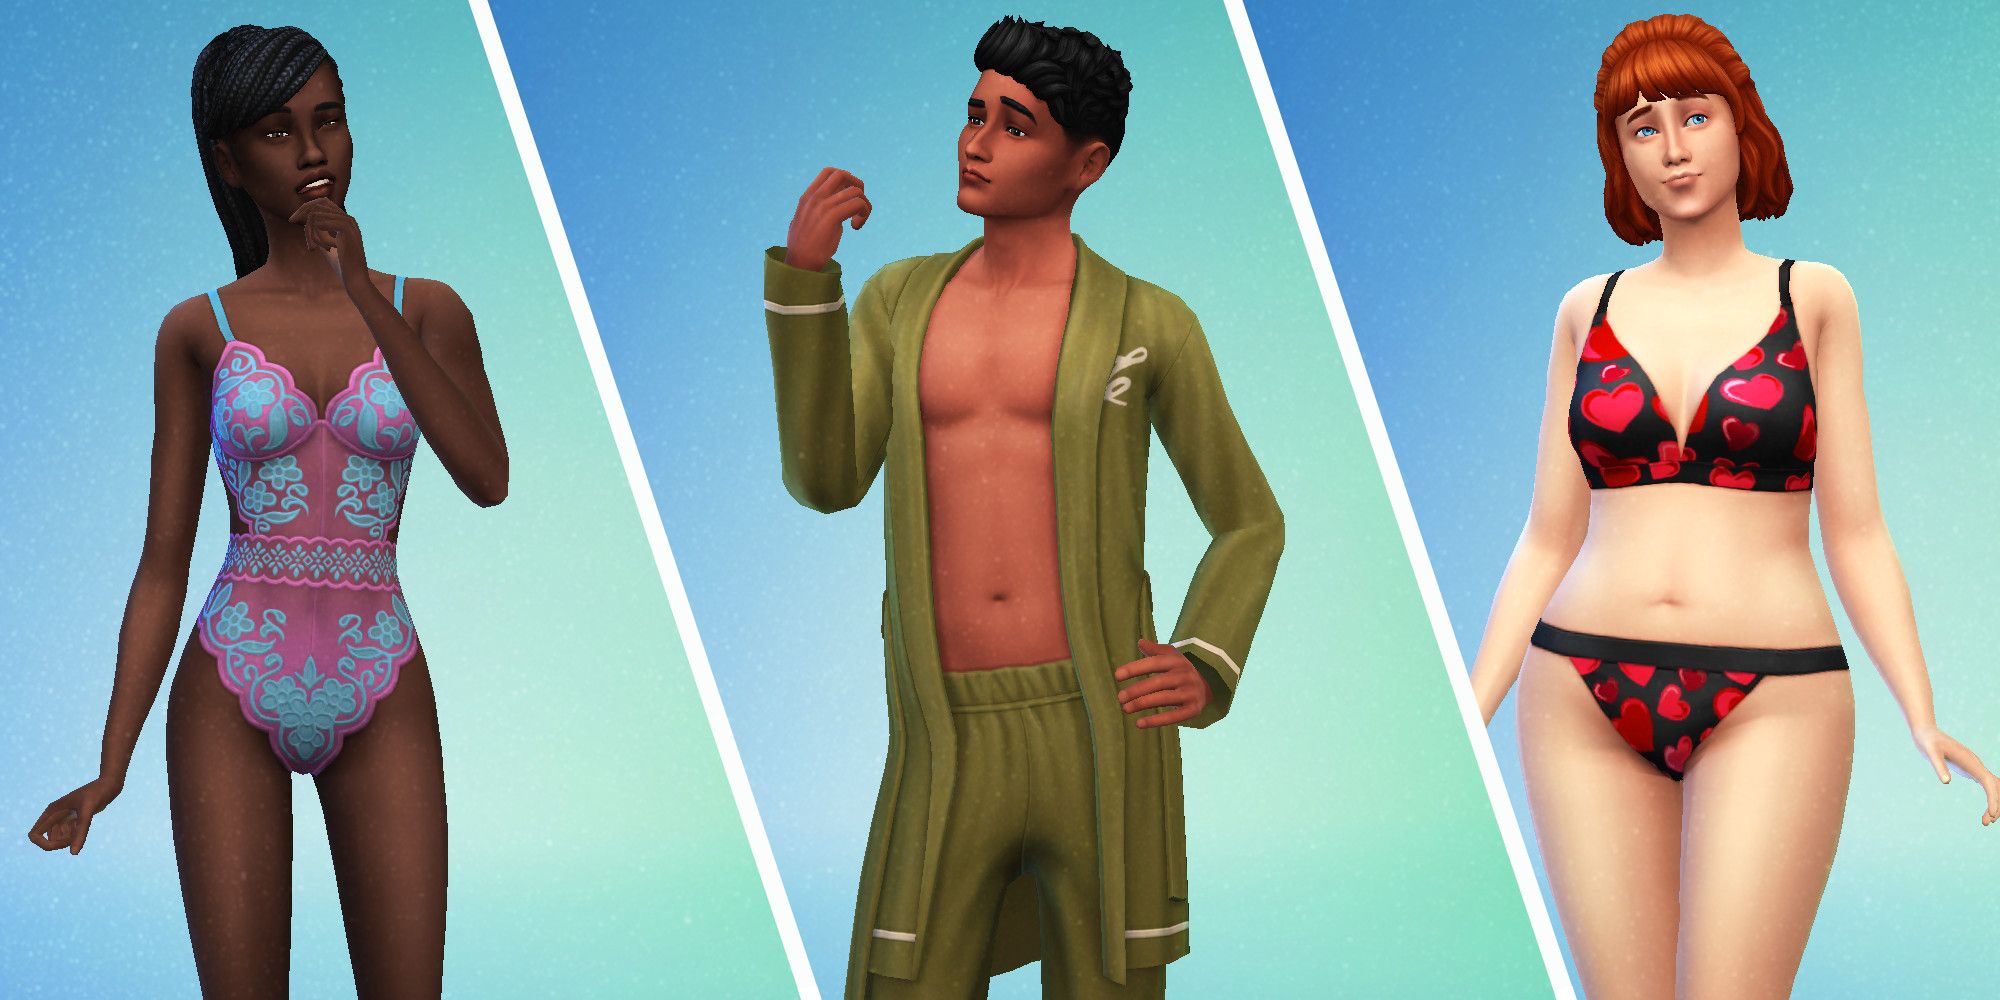 The Sims 4: All Outfits In The Simtimates Kit